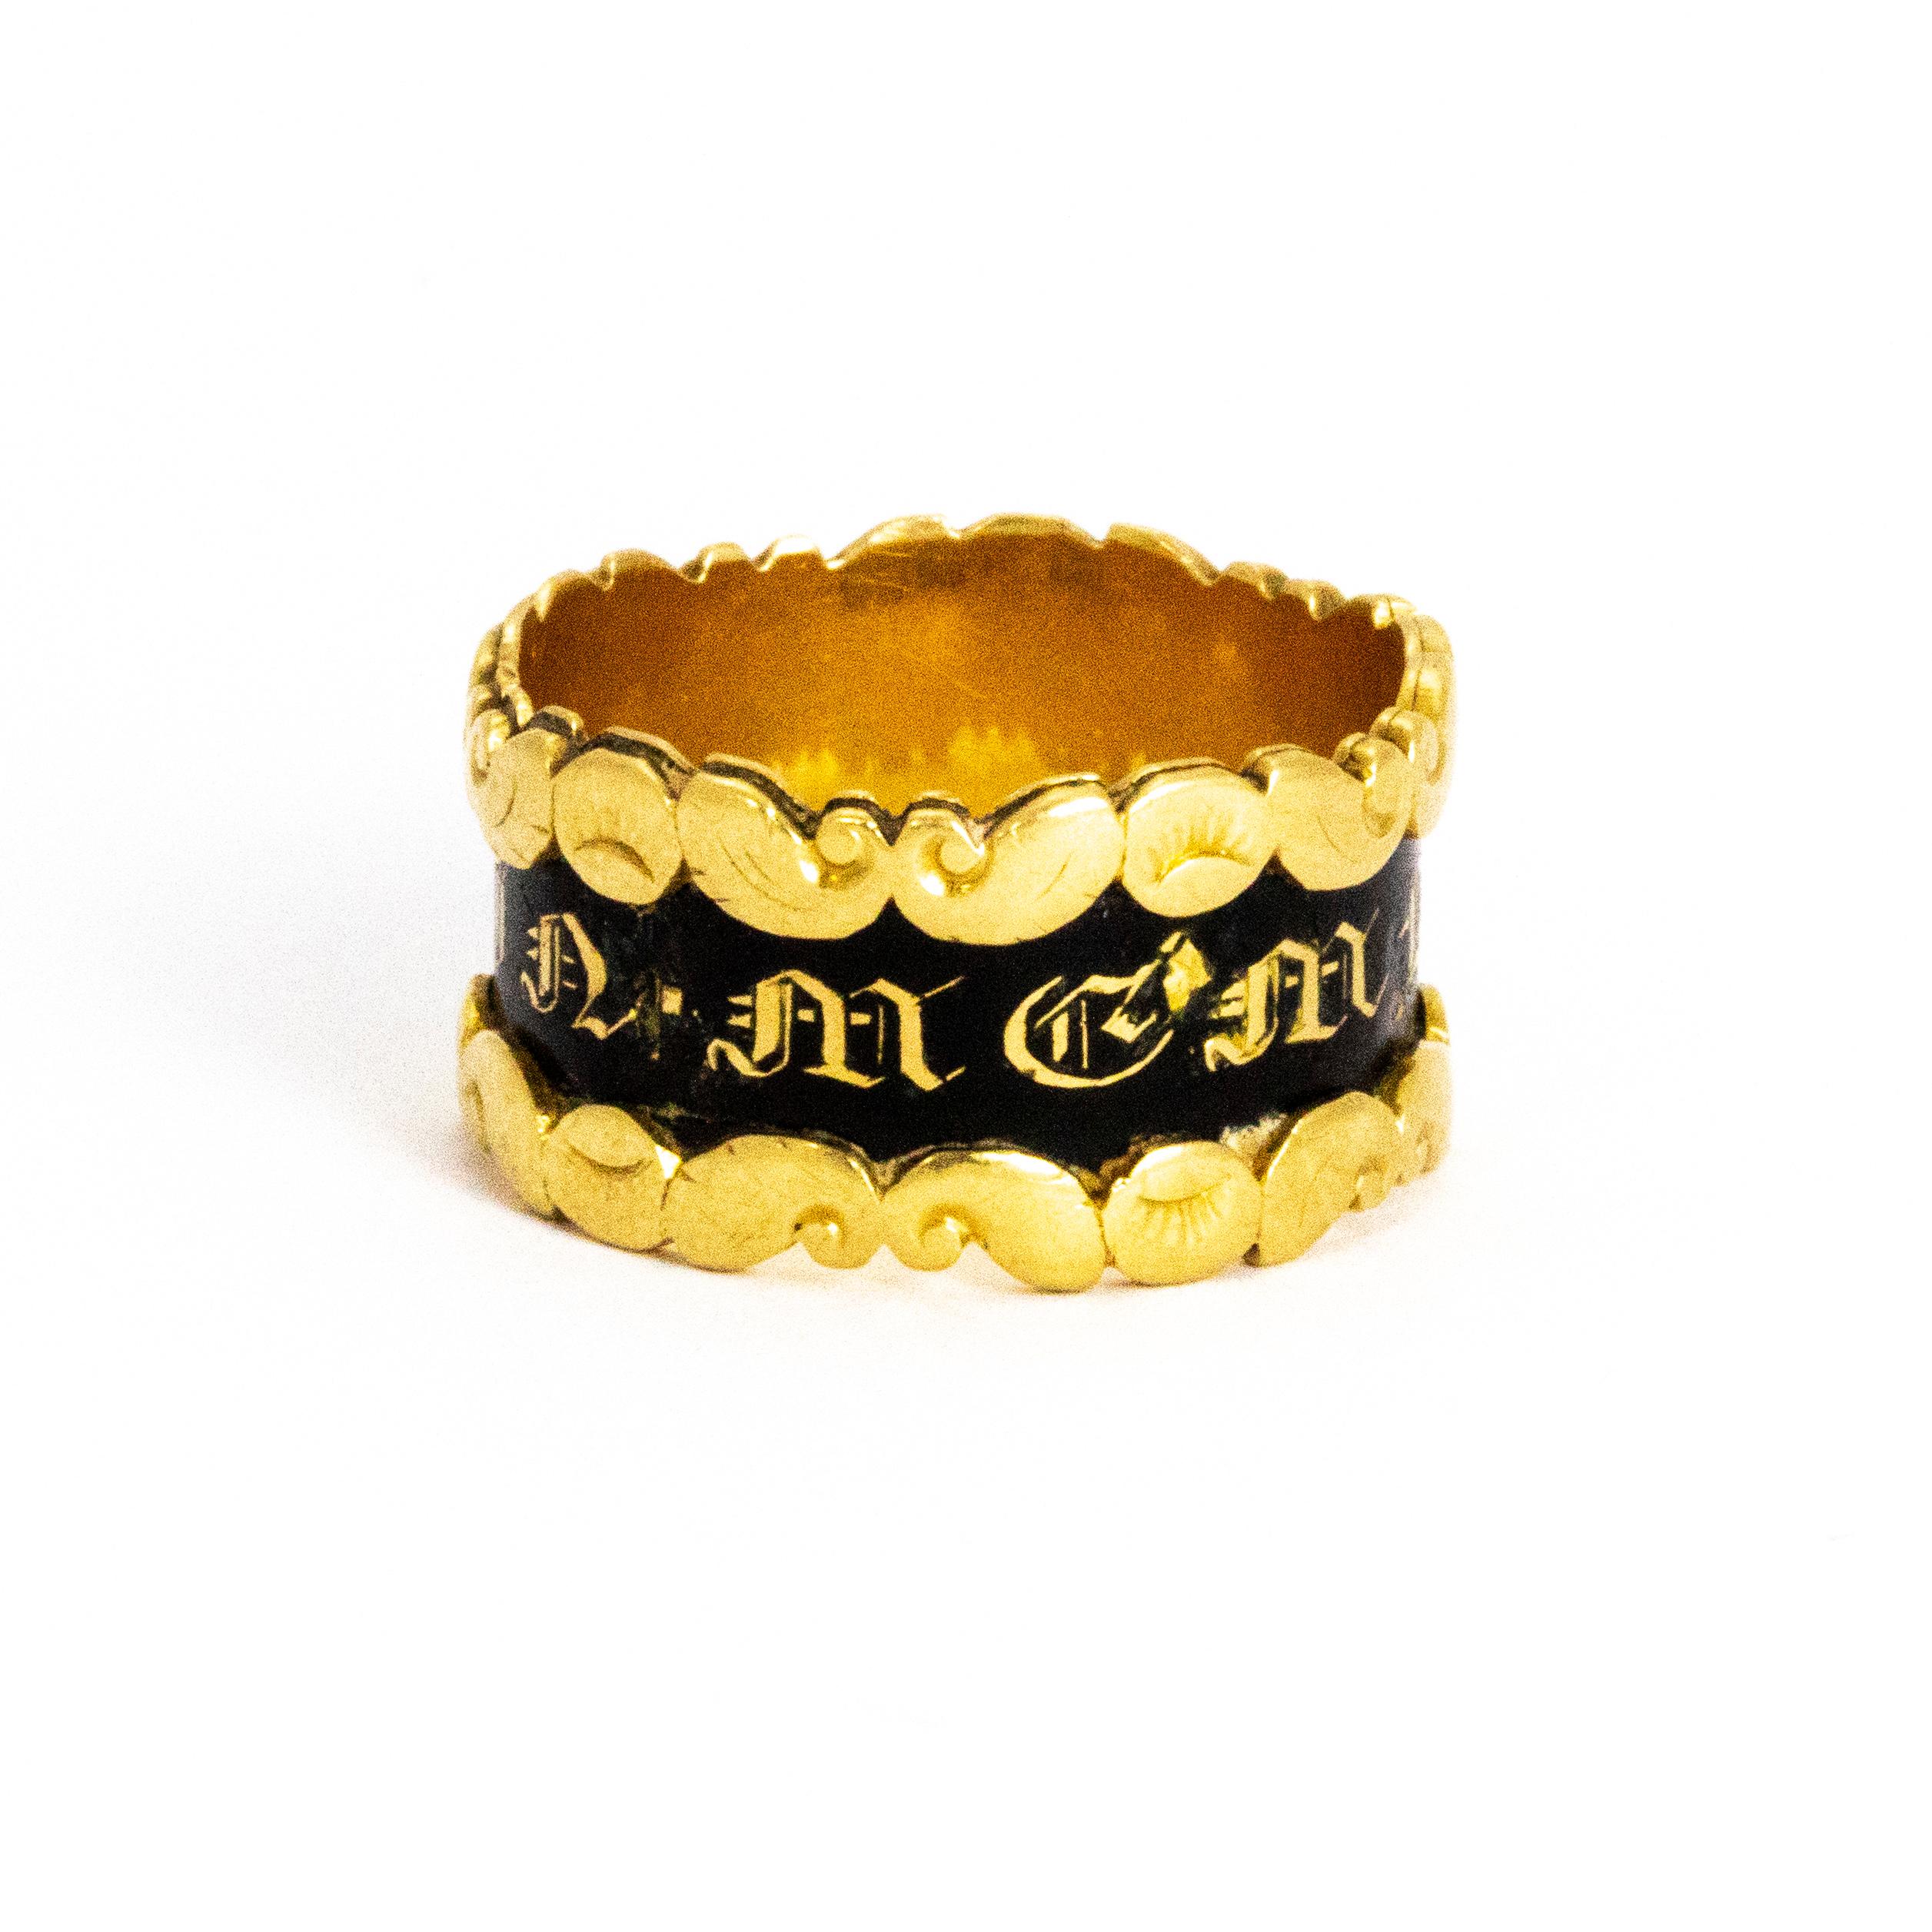 A superb mid-19th century mourning band. 'IN MMEMORY OF' is written in ornate gold lettering on black enamel around the wide band. Modelled in 18 karat yellow gold

Ring Size: O or 7.5